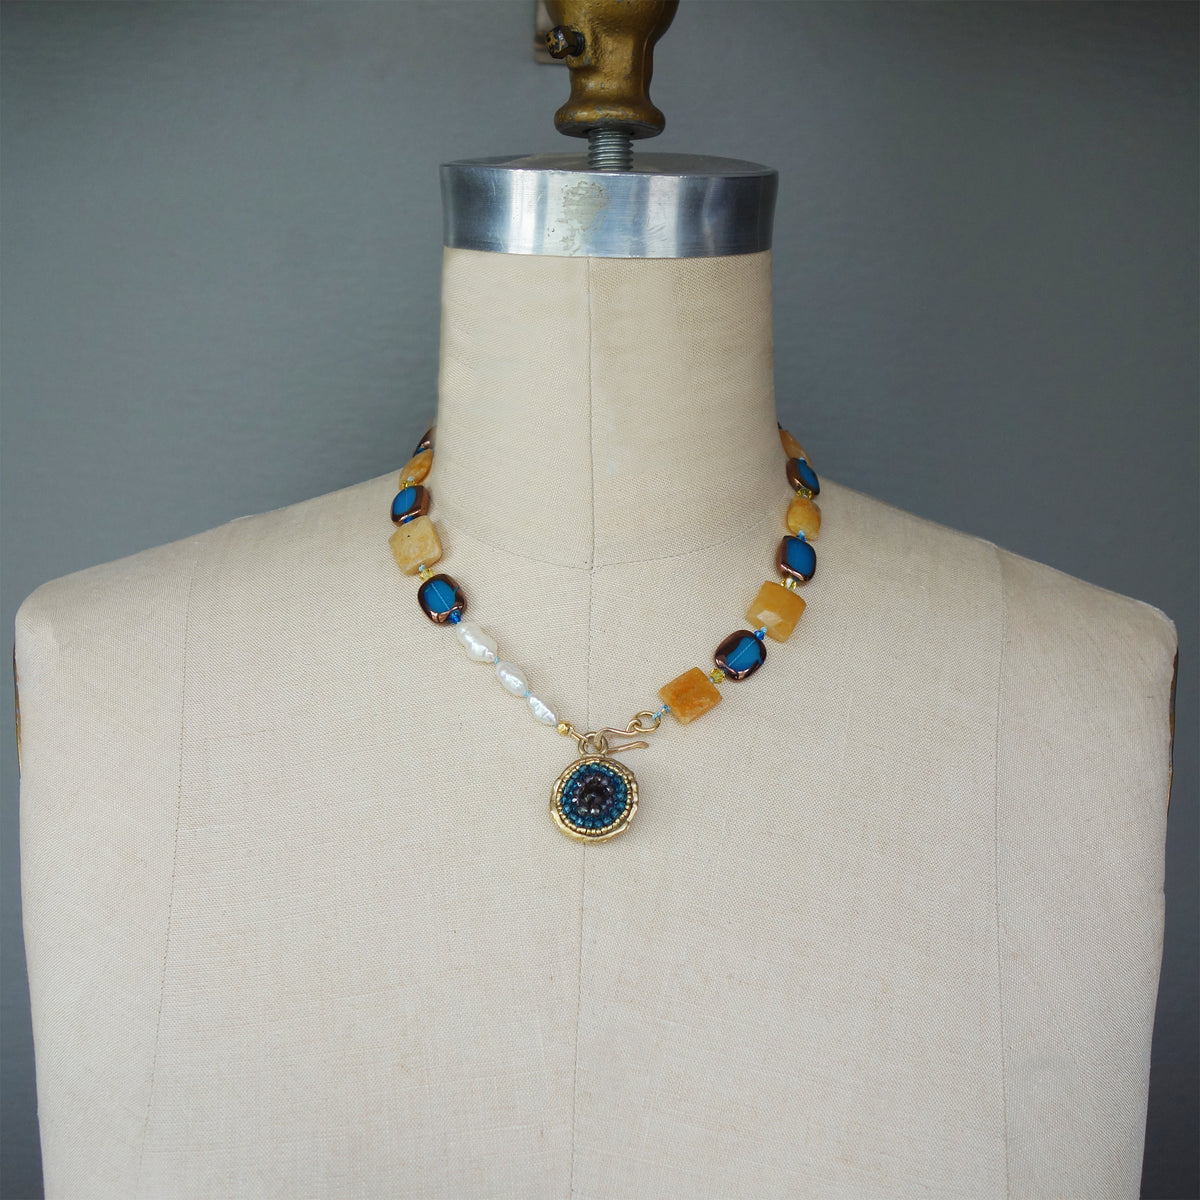 Sapphire, Pearl, and Jasper 2 Sided Mosaic Necklace (Wanderlust Paris)